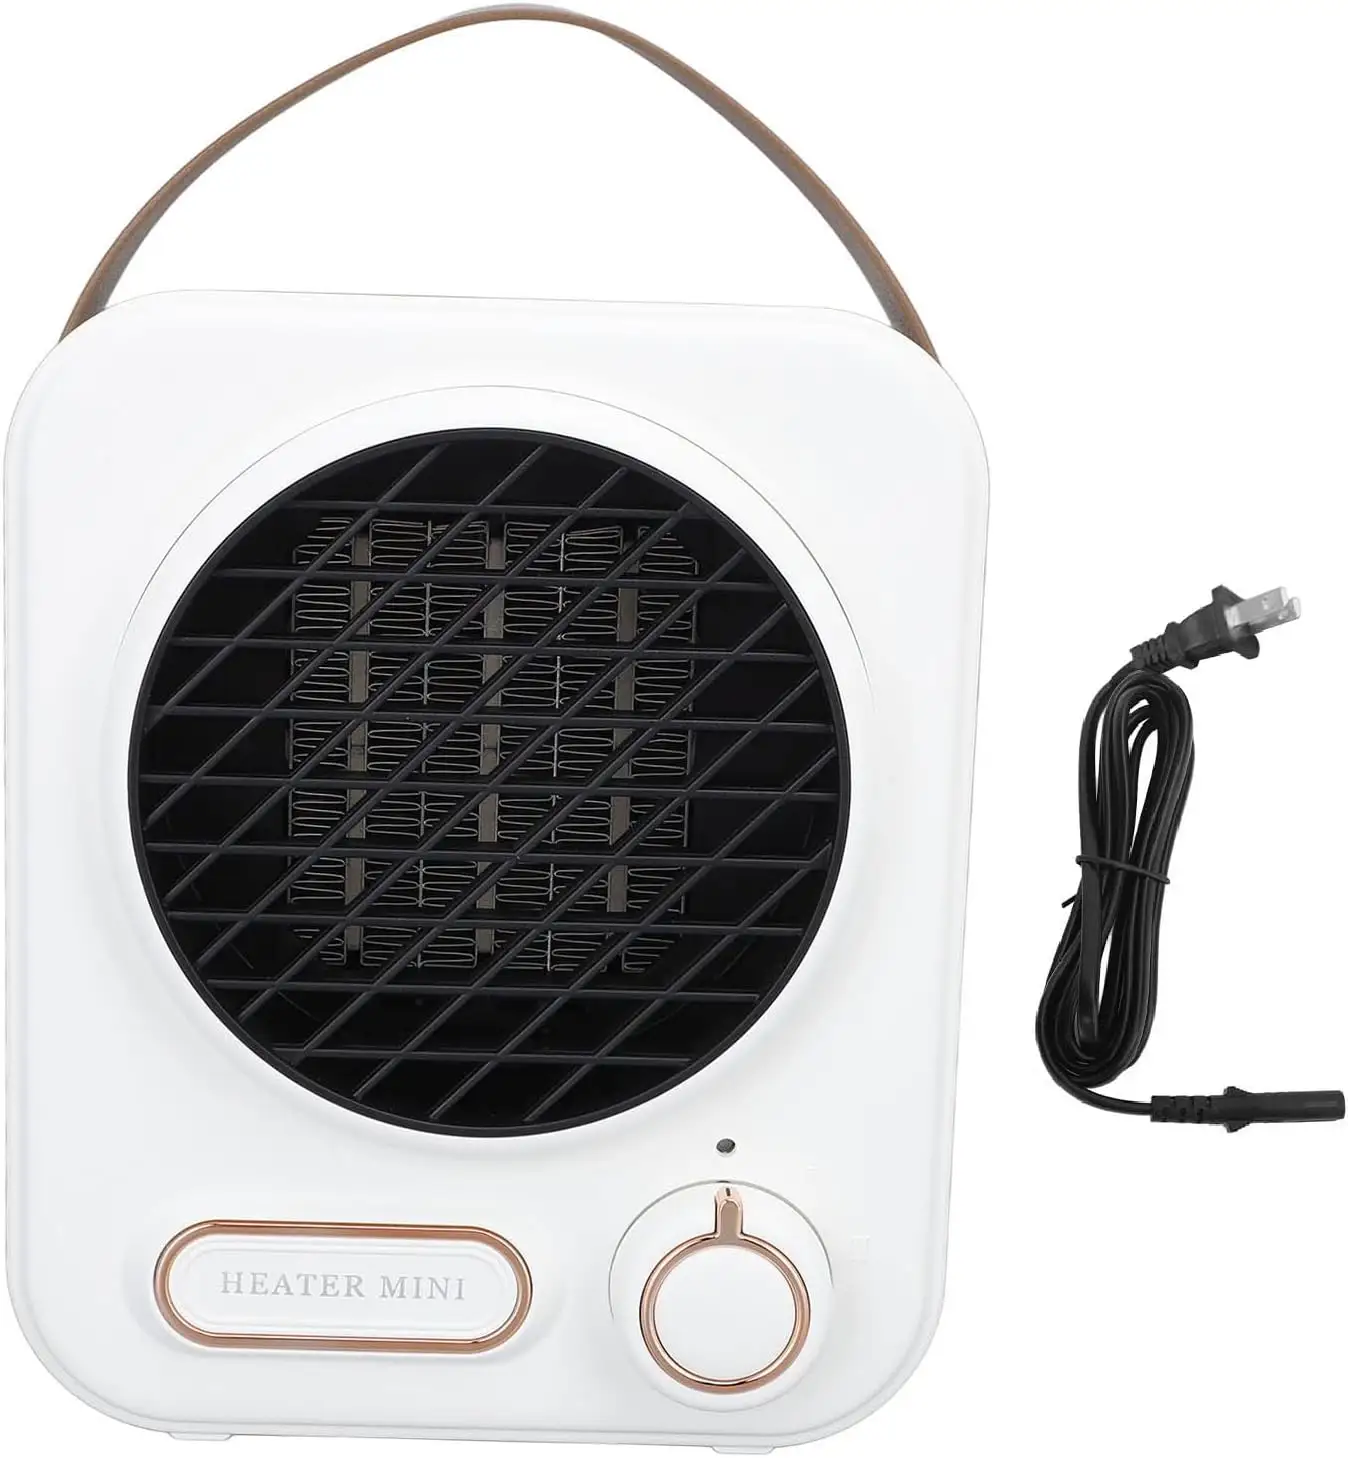 Portable 500w Mini Rechargeable Heater Ptc Ceramic Heating Fan With High Temperature Protection For Household Electric Heaters